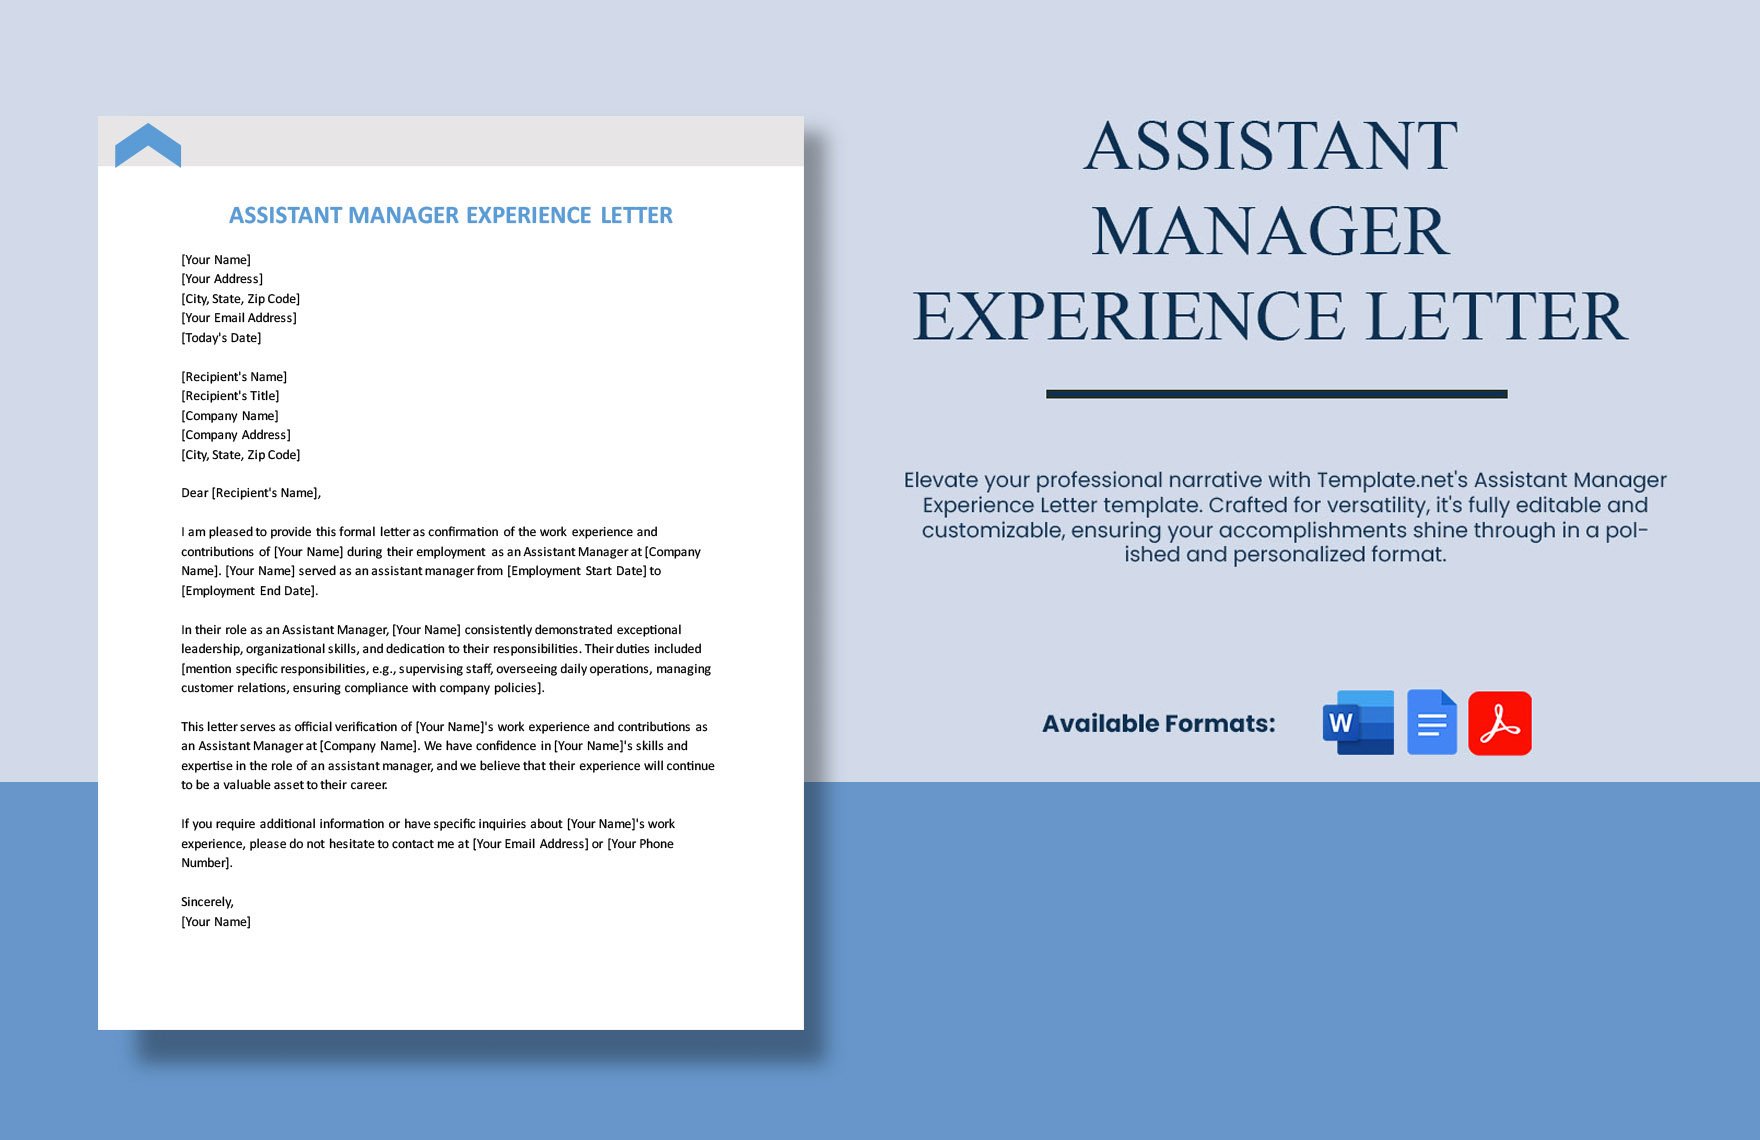 Free Assistant Manager Experience Letter in Word, Google Docs, PDF